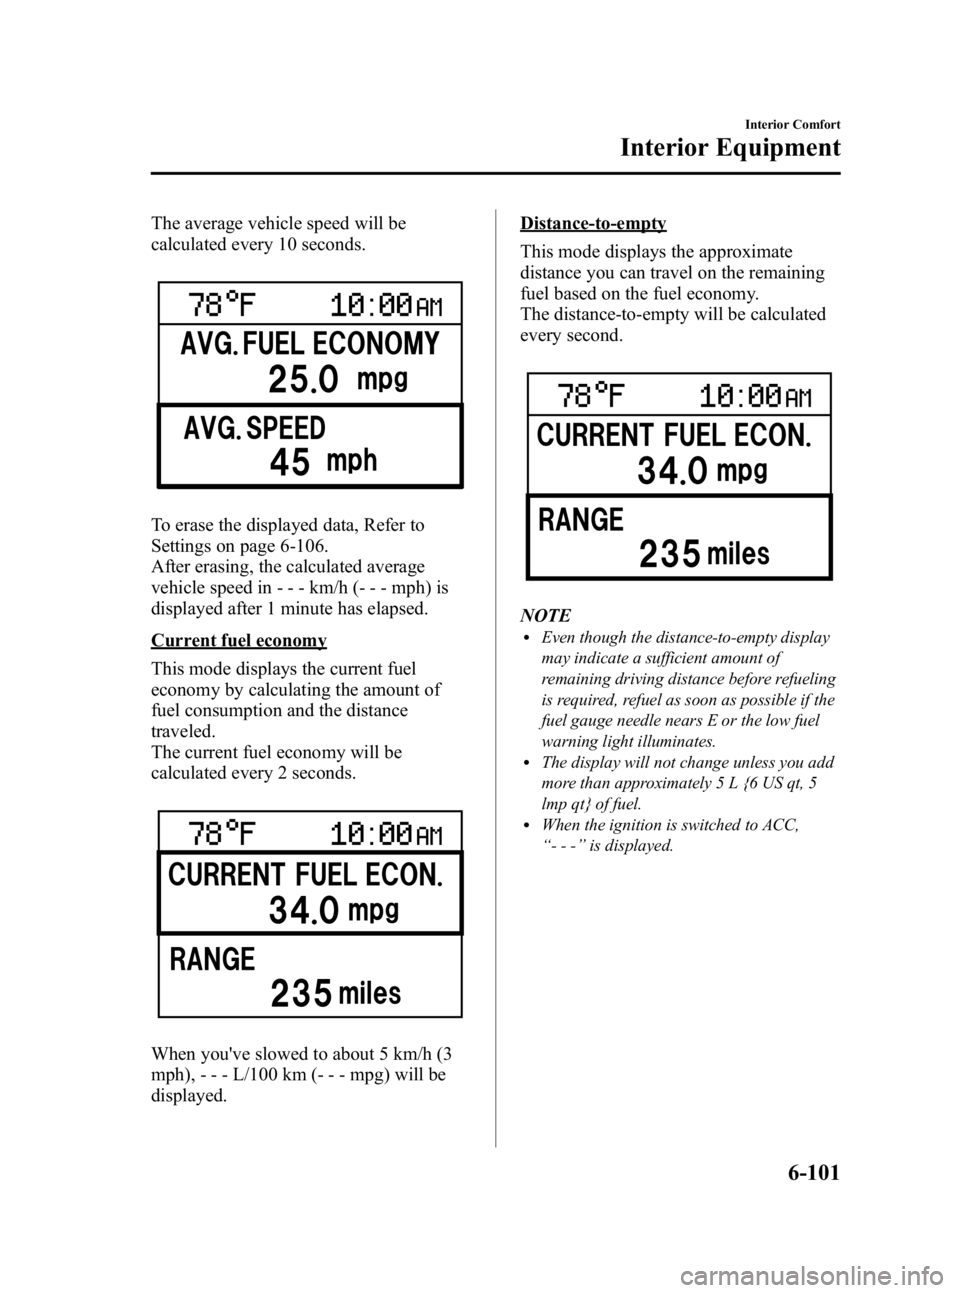 MAZDA MODEL 3 5-DOOR 2010  Owners Manual Black plate (331,1)
The average vehicle speed will be
calculated every 10 seconds.
To erase the displayed data, Refer to
Settings on page 6-106.
After erasing, the calculated average
vehicle speed in 